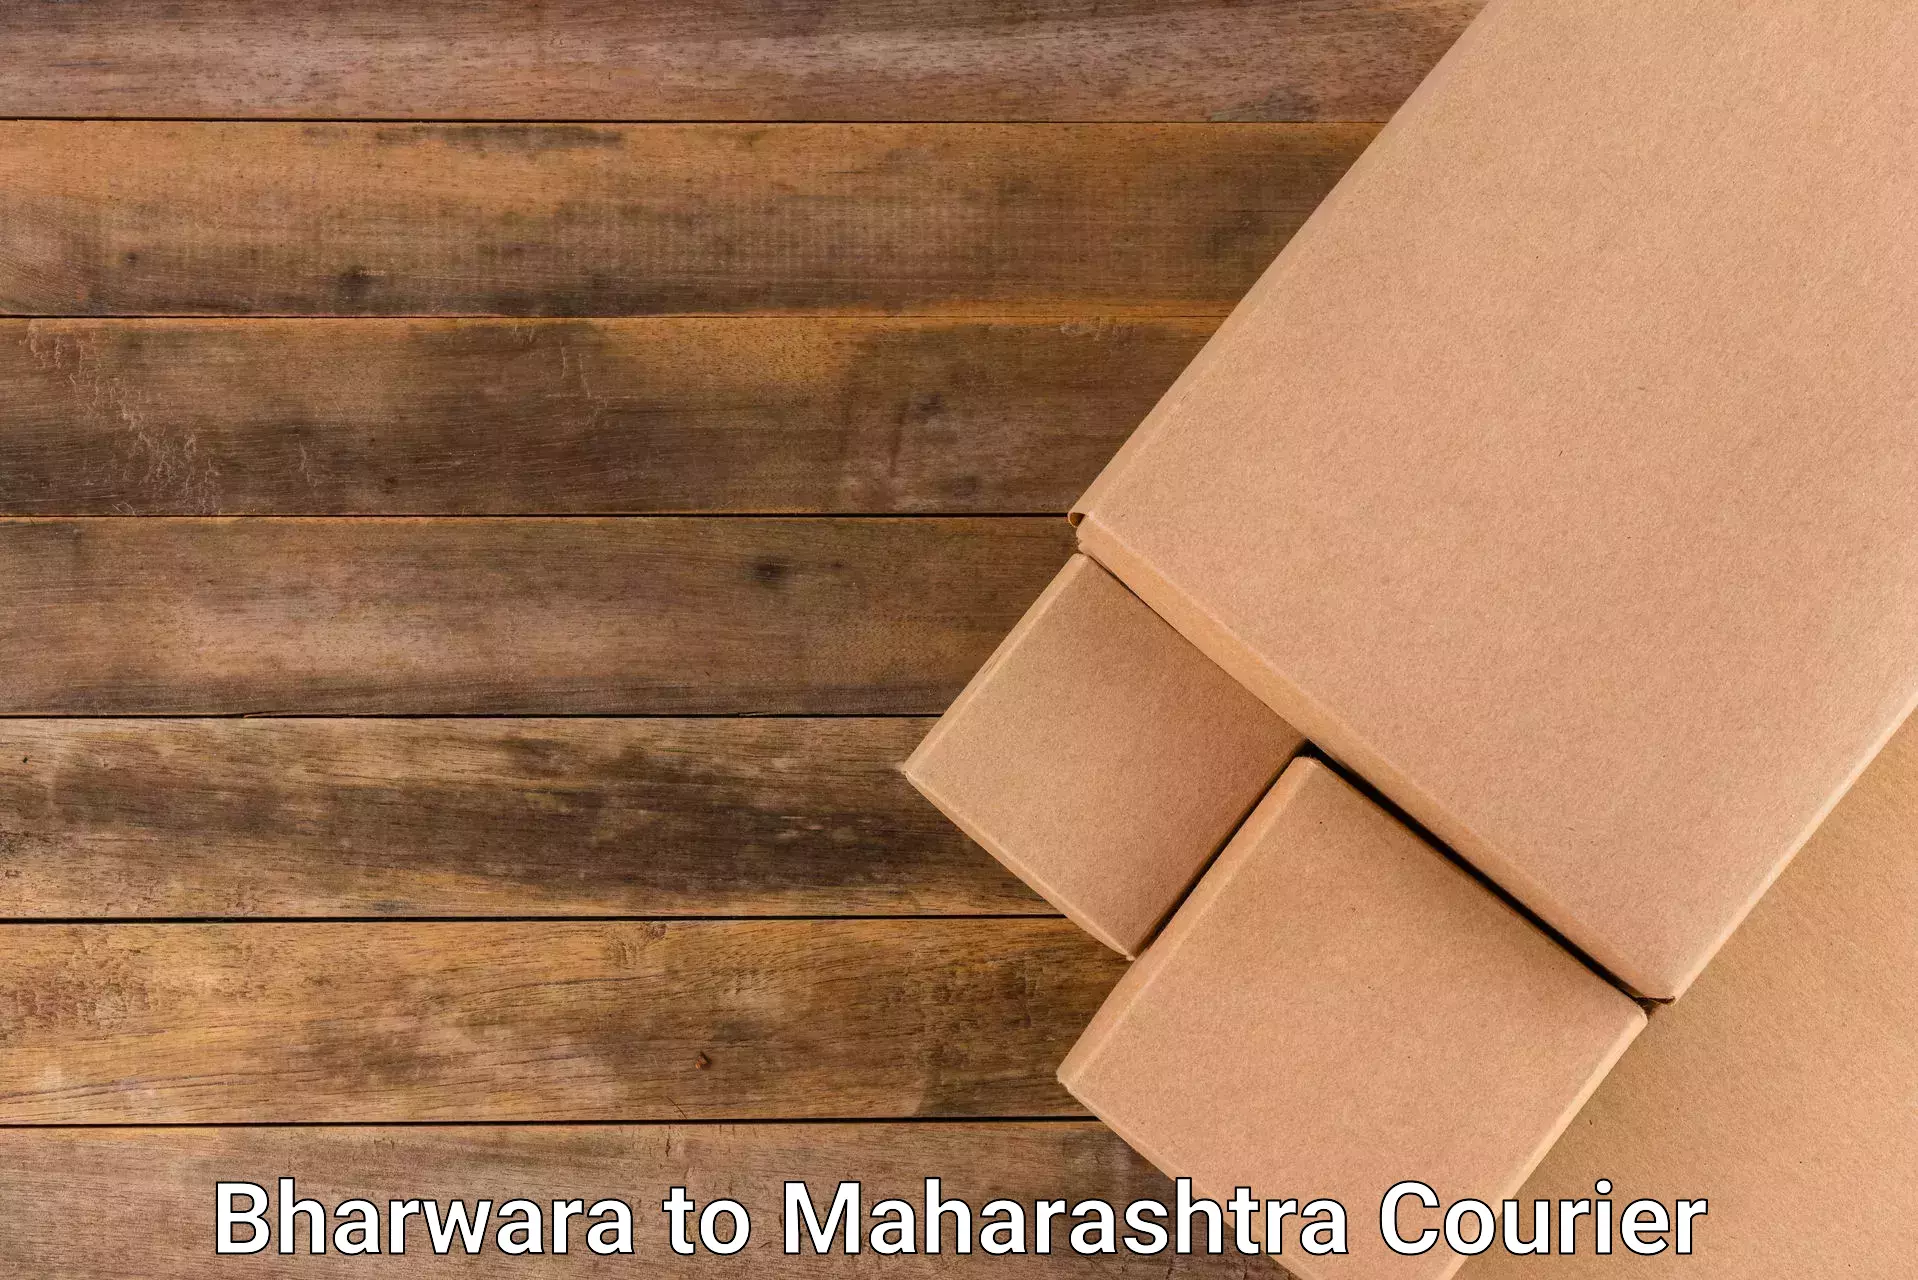 Reliable courier service in Bharwara to Sindhudurg